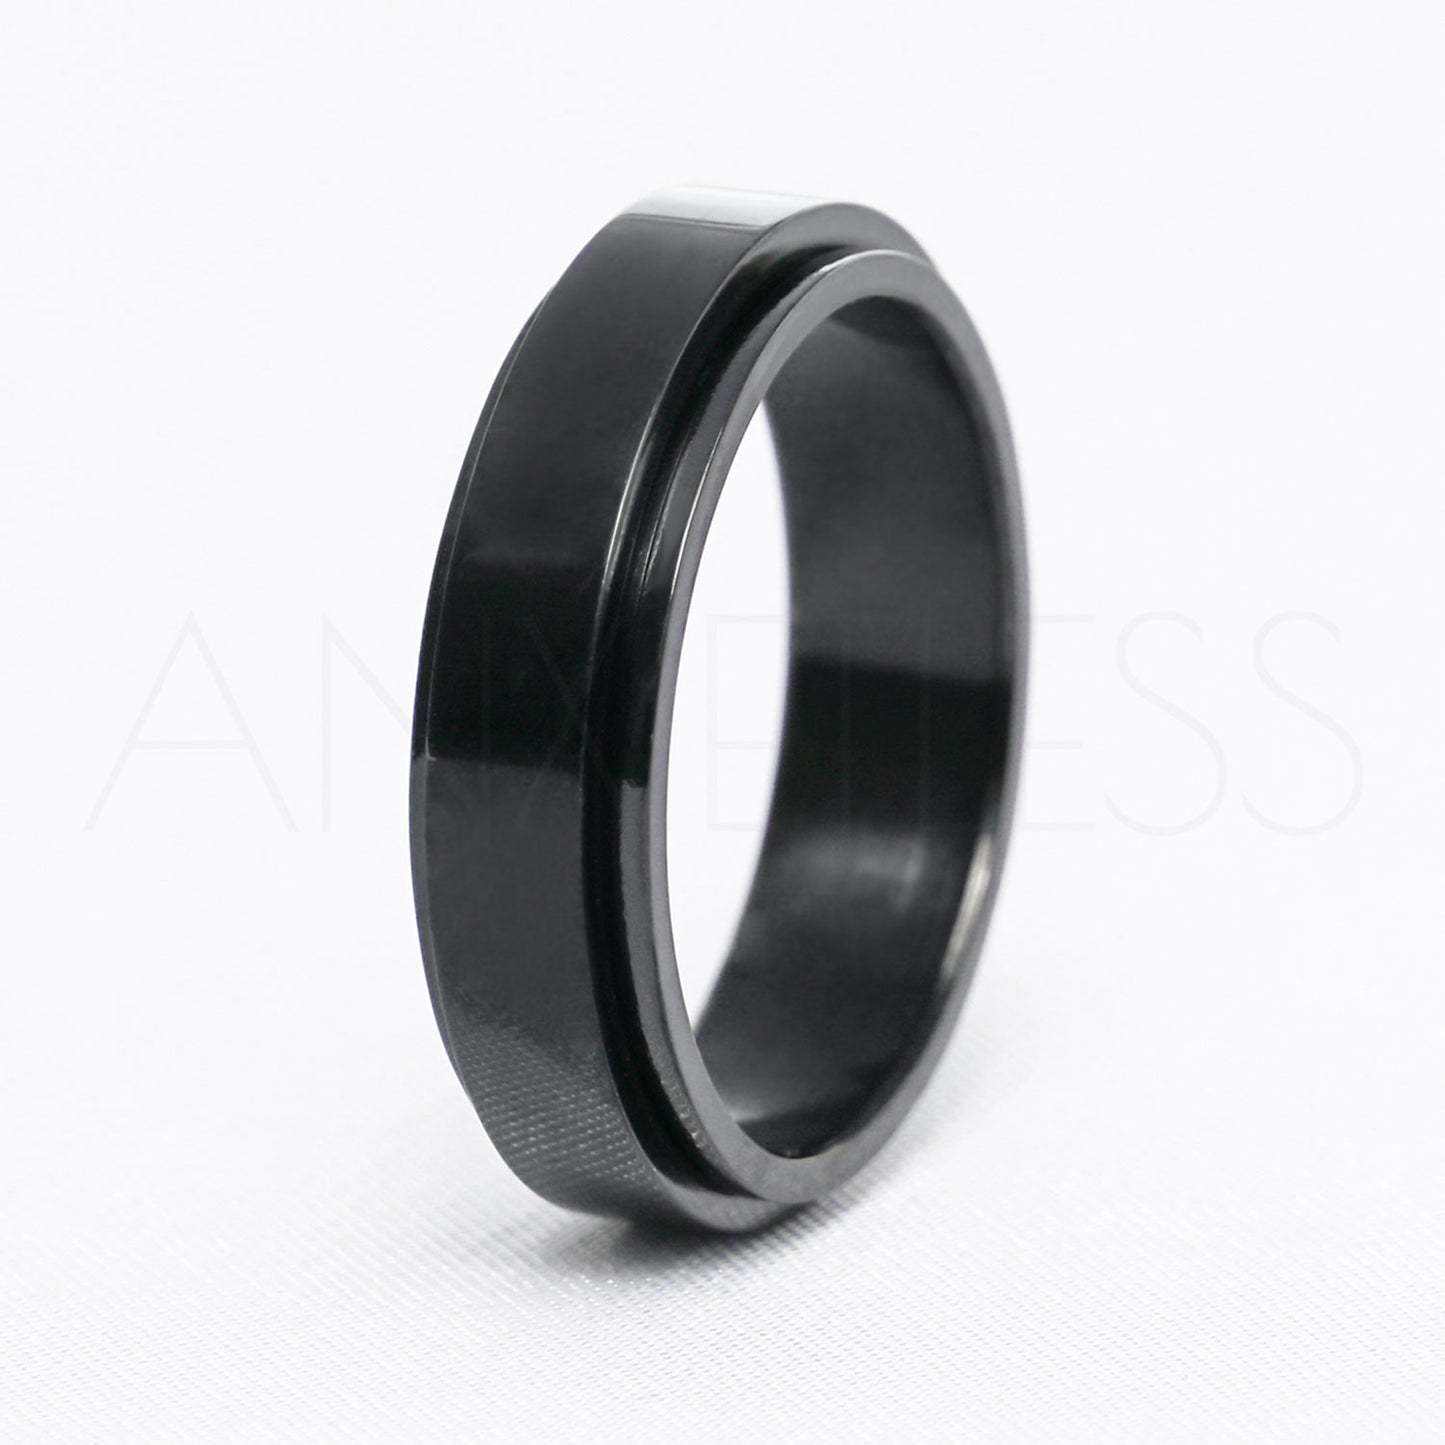 Black anxiety ring with a smooth polished design displayed against a white background